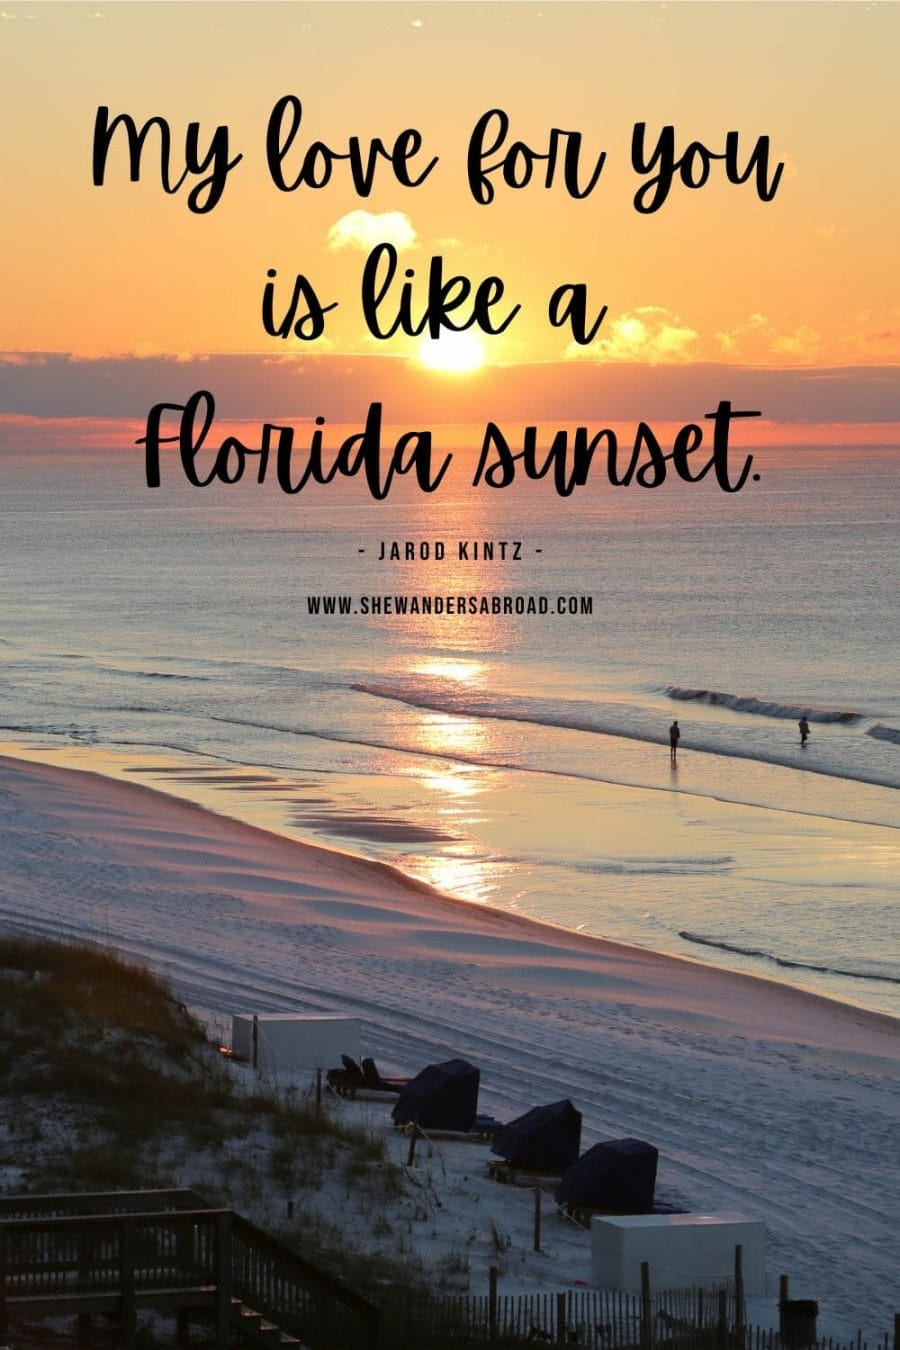 Meaningful Florida Quotes for Instagram